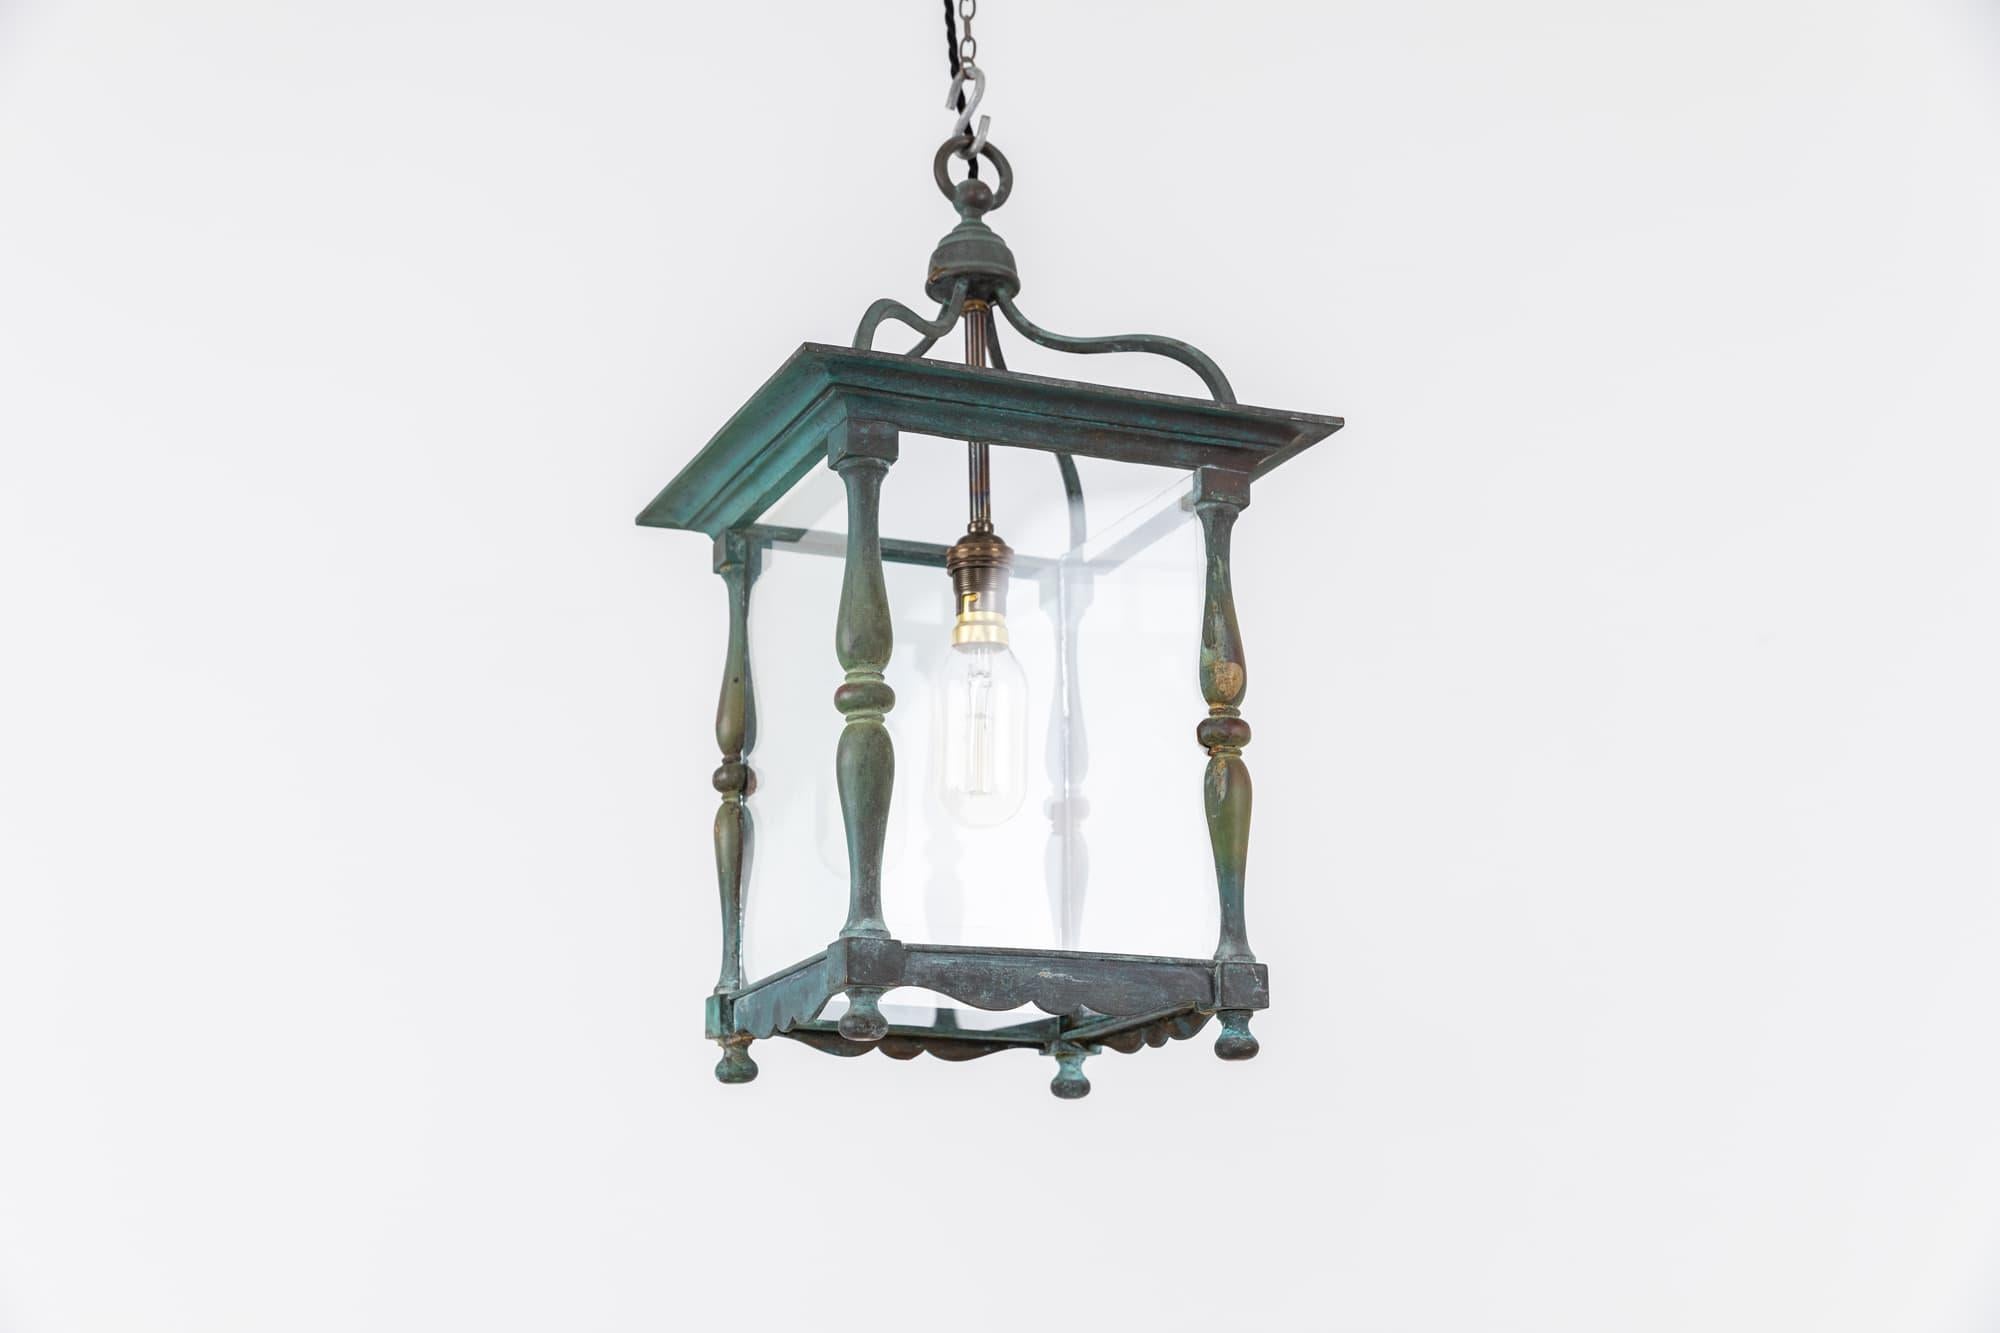 

A beautifully formed cast brass porch lantern made by Faraday & Sons. c.1920

A heavy duty, high quality lantern, cast from brass which has built up a wonderful patina. Glazed panels all intact. Stamped F&S to hanging loop.

Rewired with 1m of